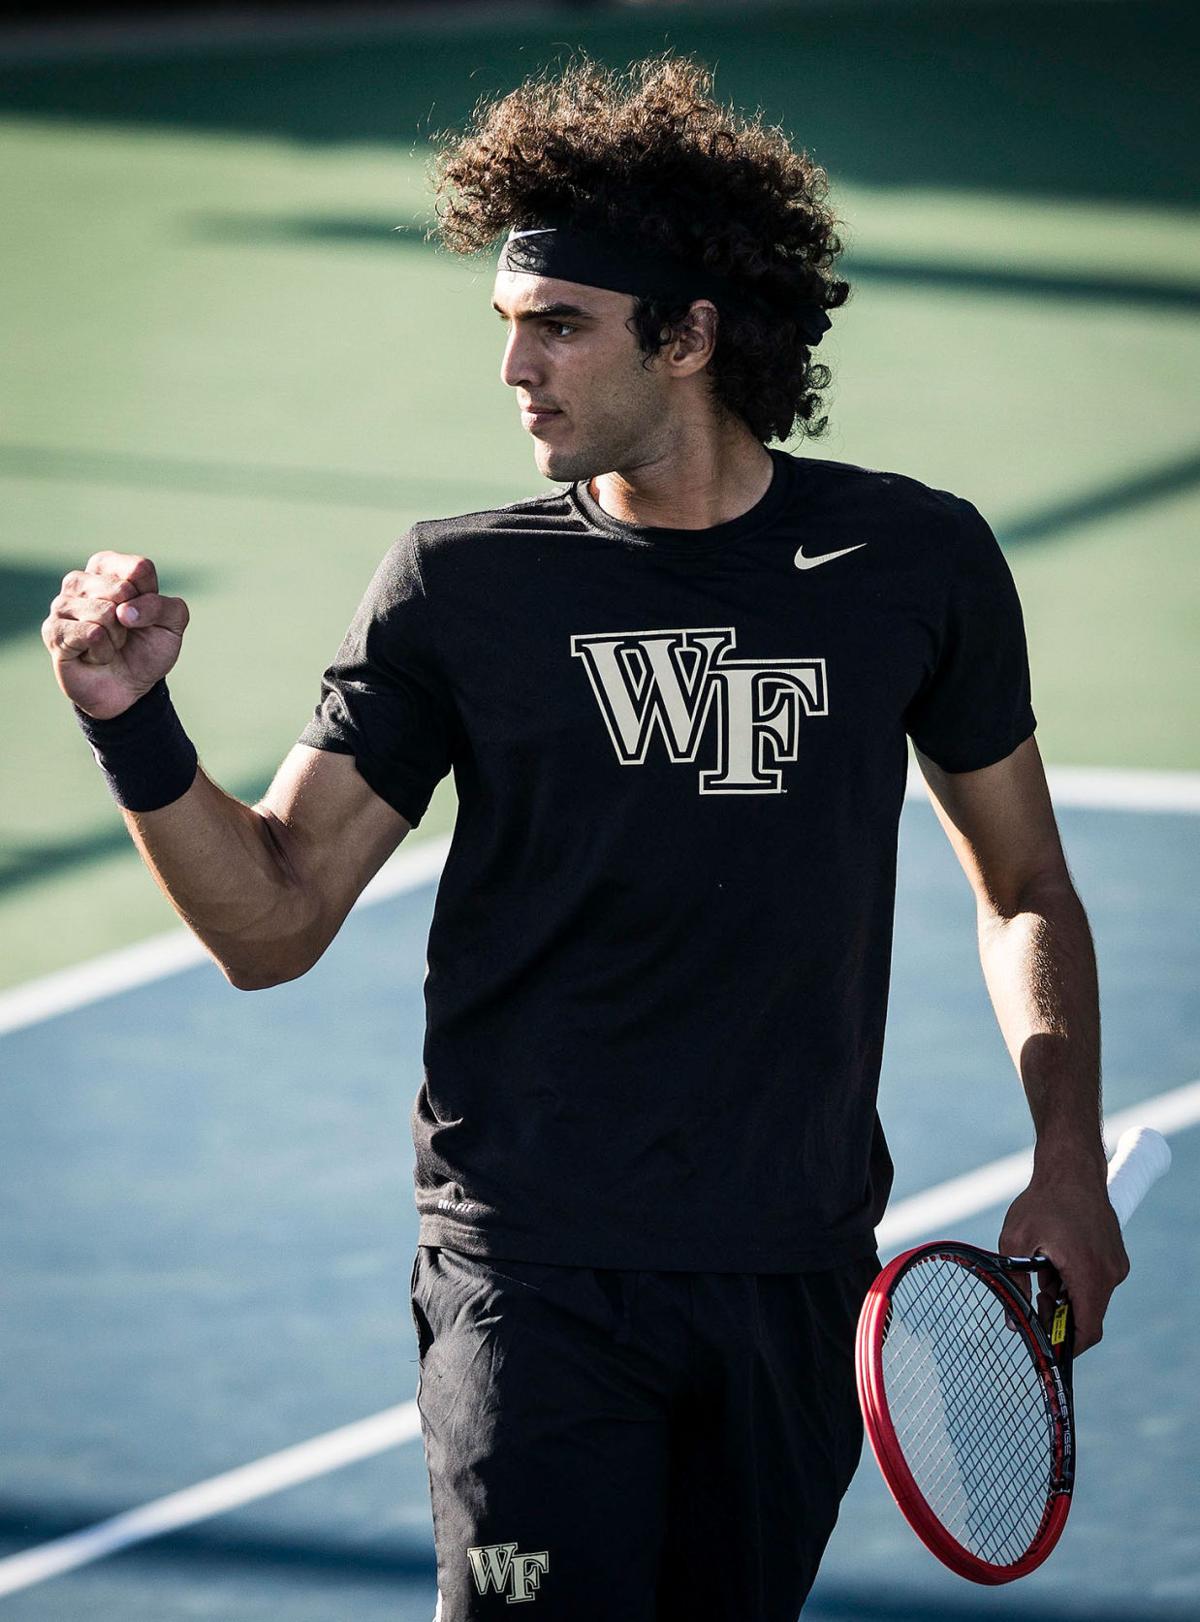 Wake Forest men's tennis hangs on to advance to Round of 16 | Wfu ...